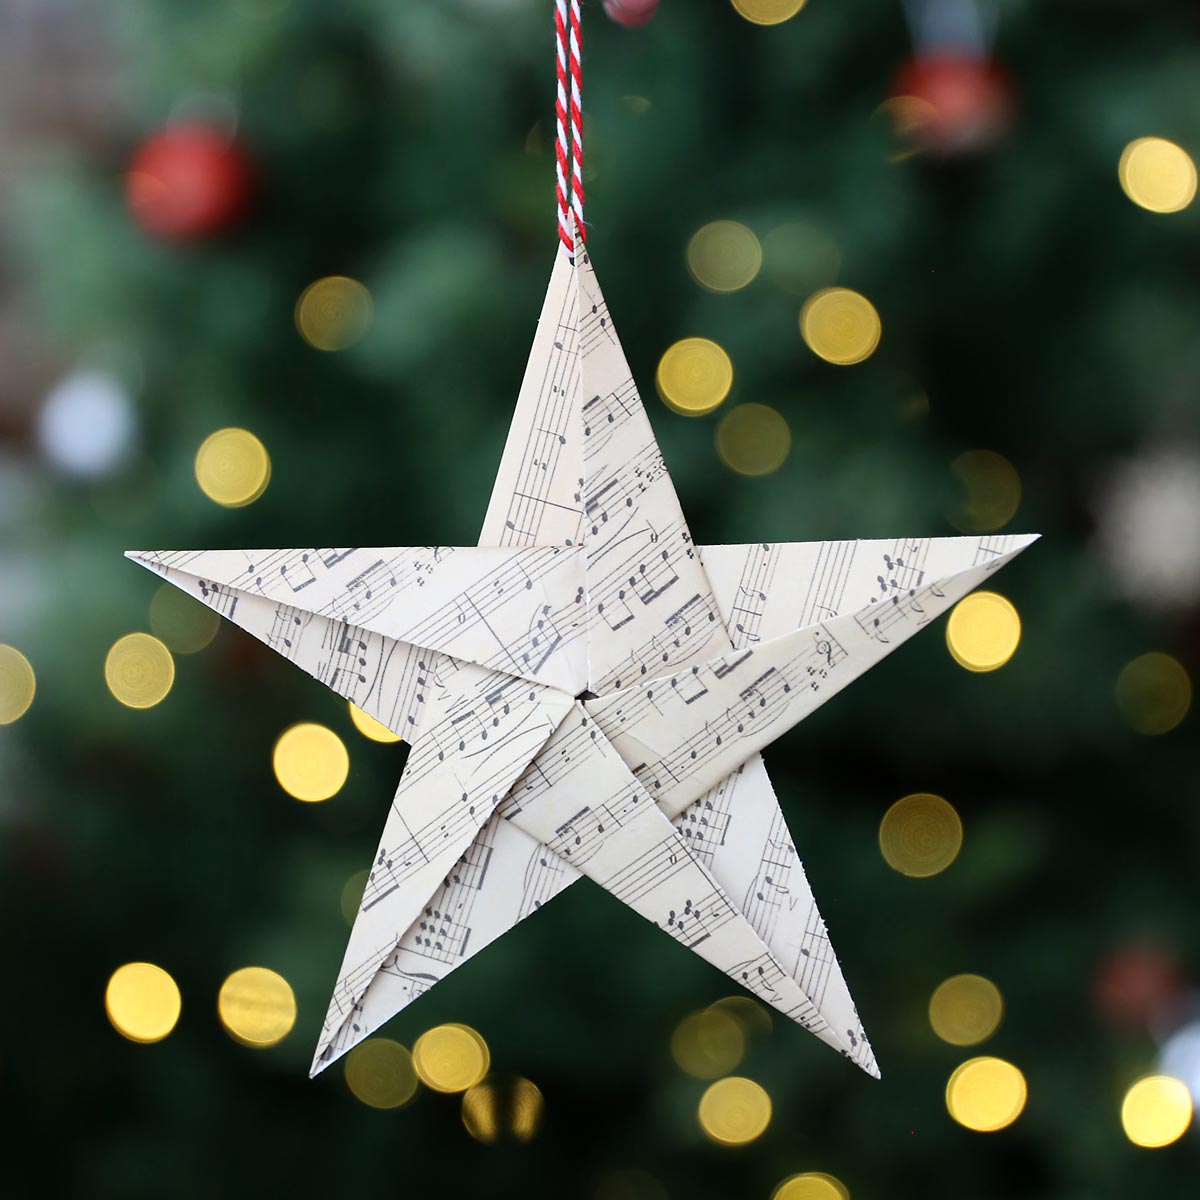 How to make a paper star - Christmas ornaments - 5 Pointed Origami